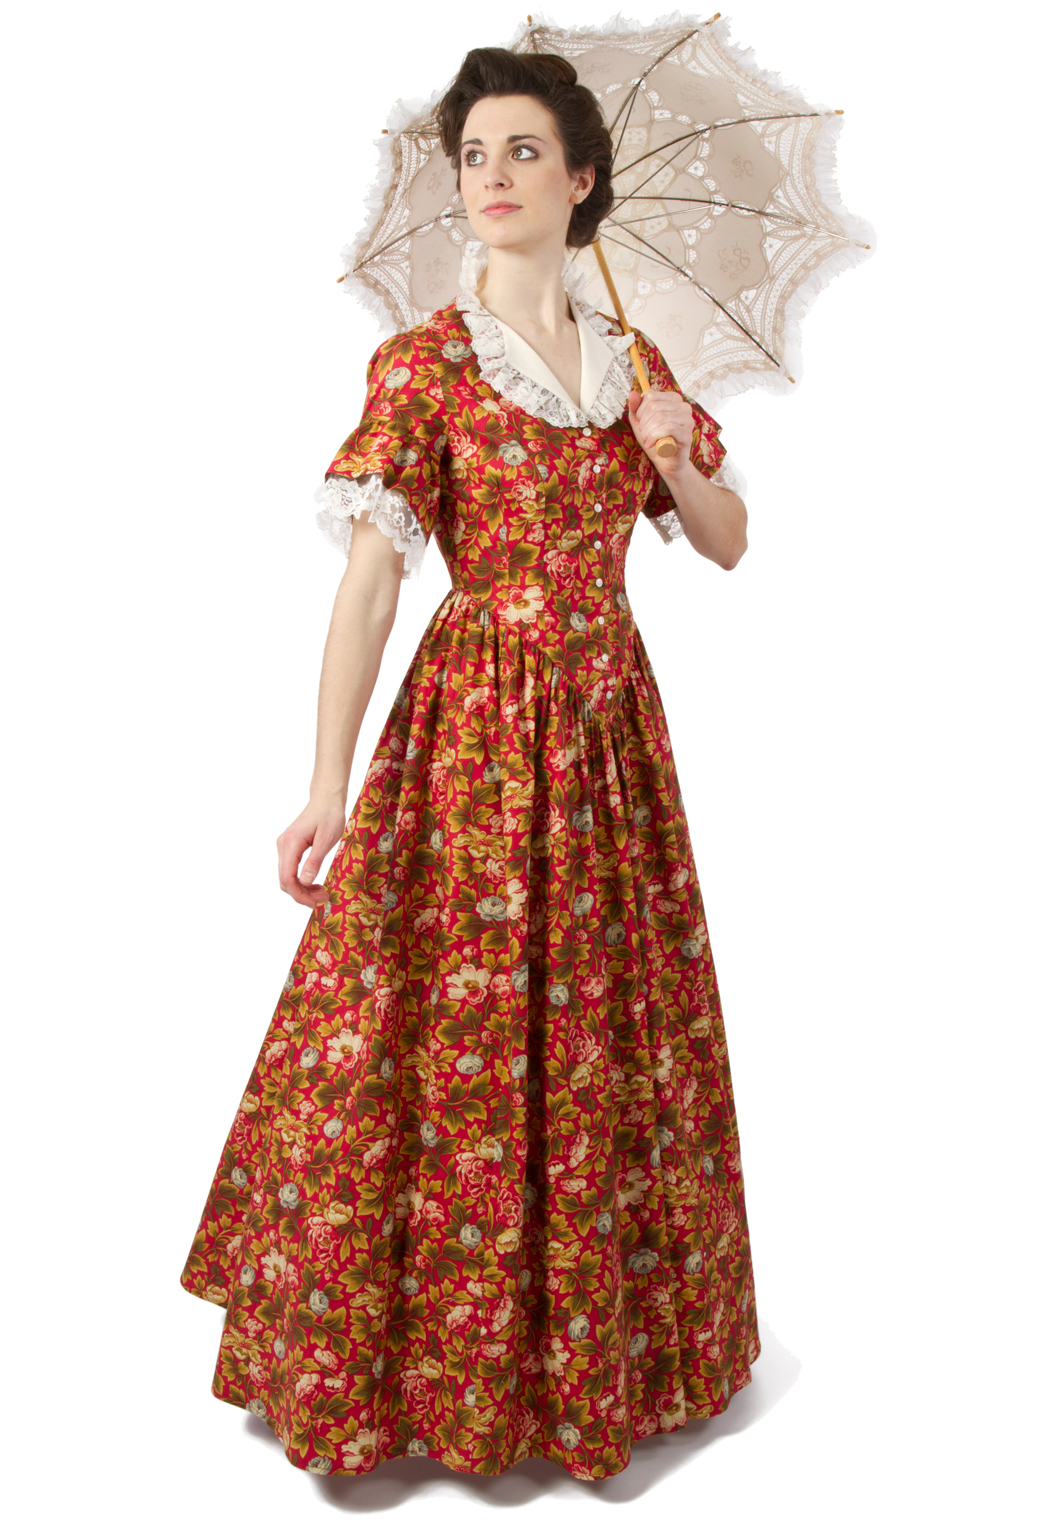 Prairie Dress Recollections